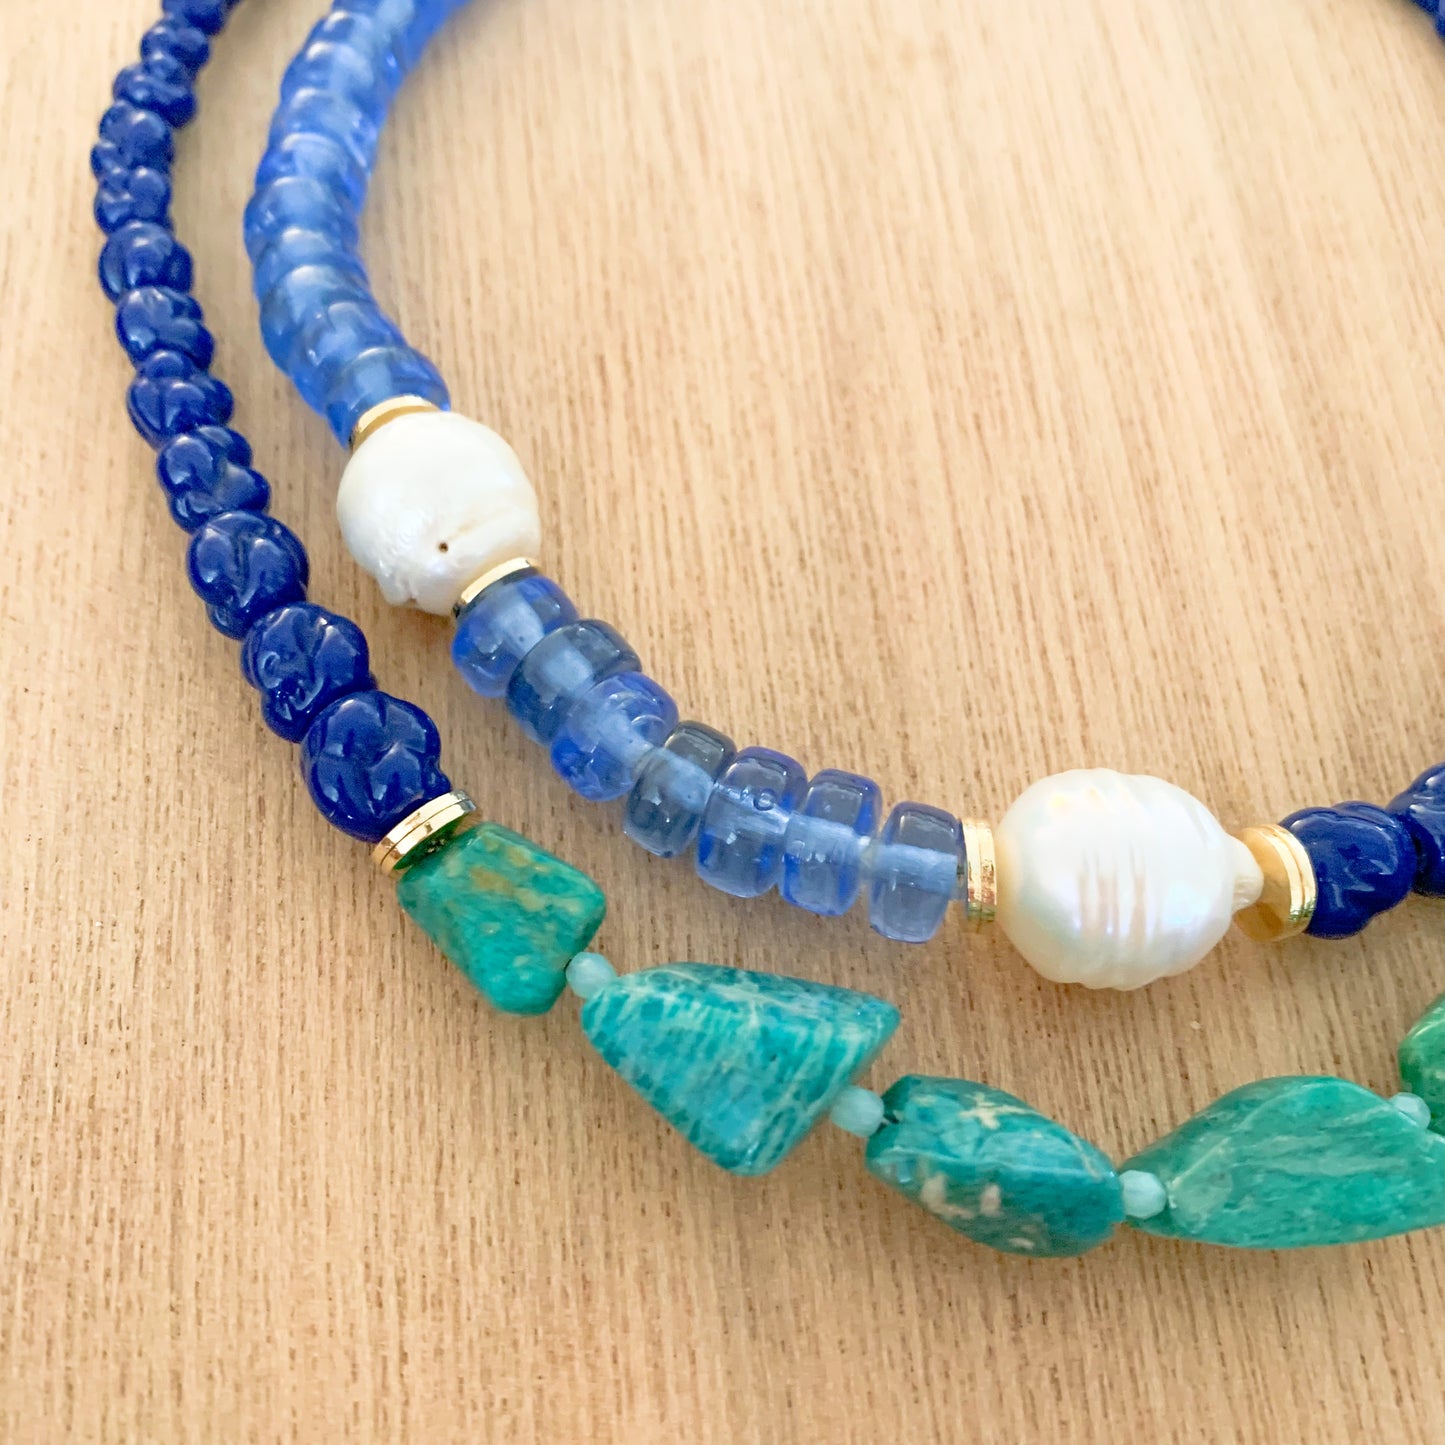 Baroque Pearlies: Amazonite and Blues Necklace